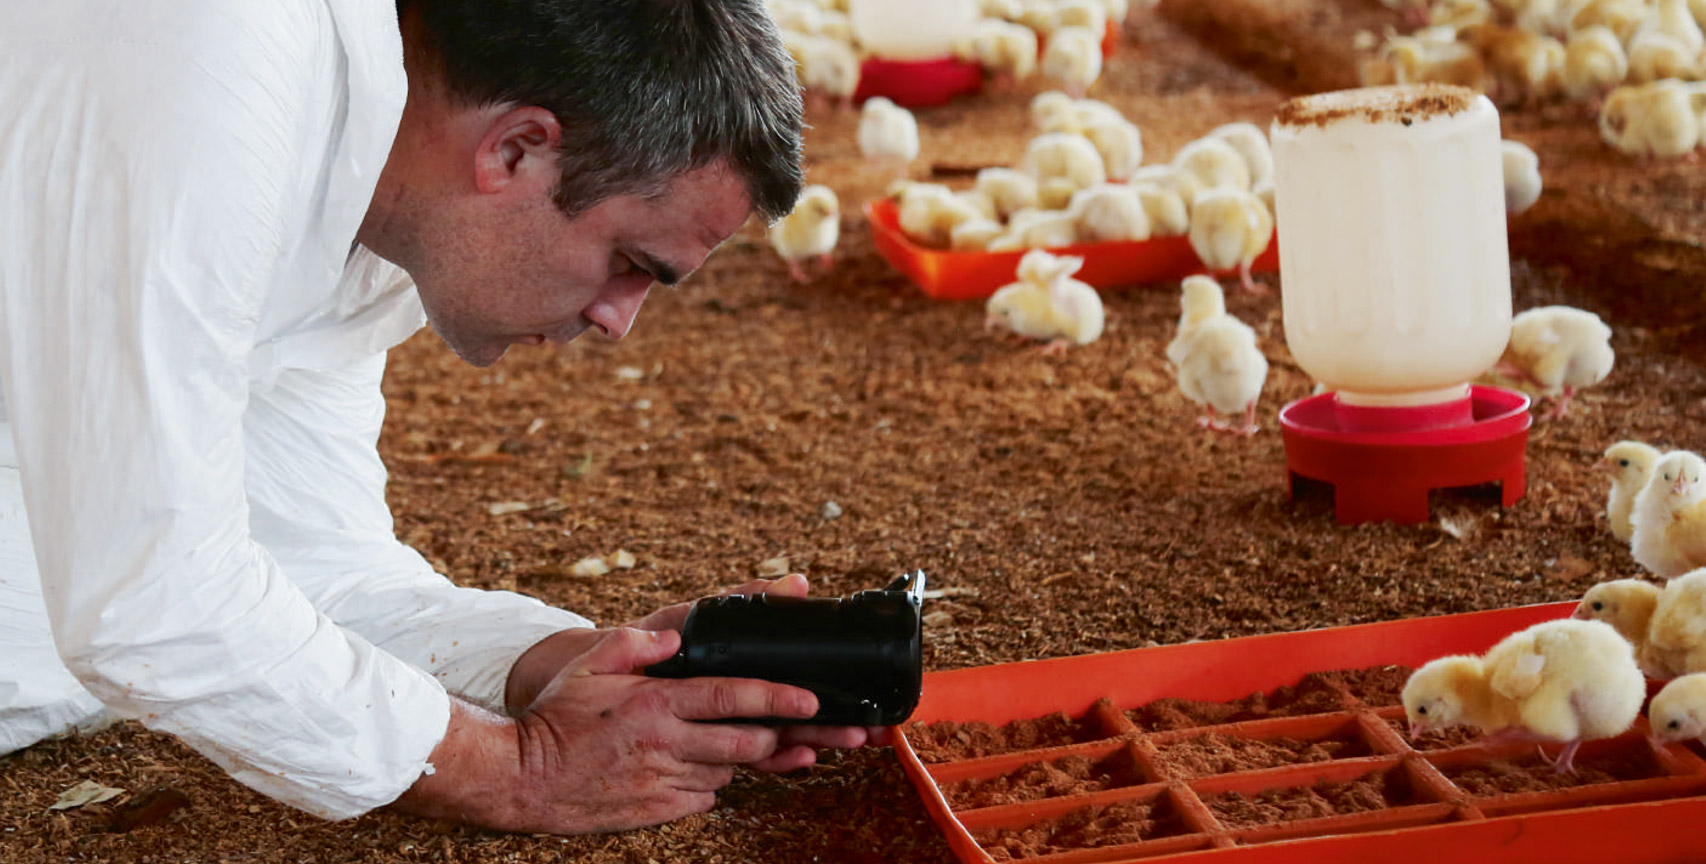 Jose Valle filming chicks in a farm